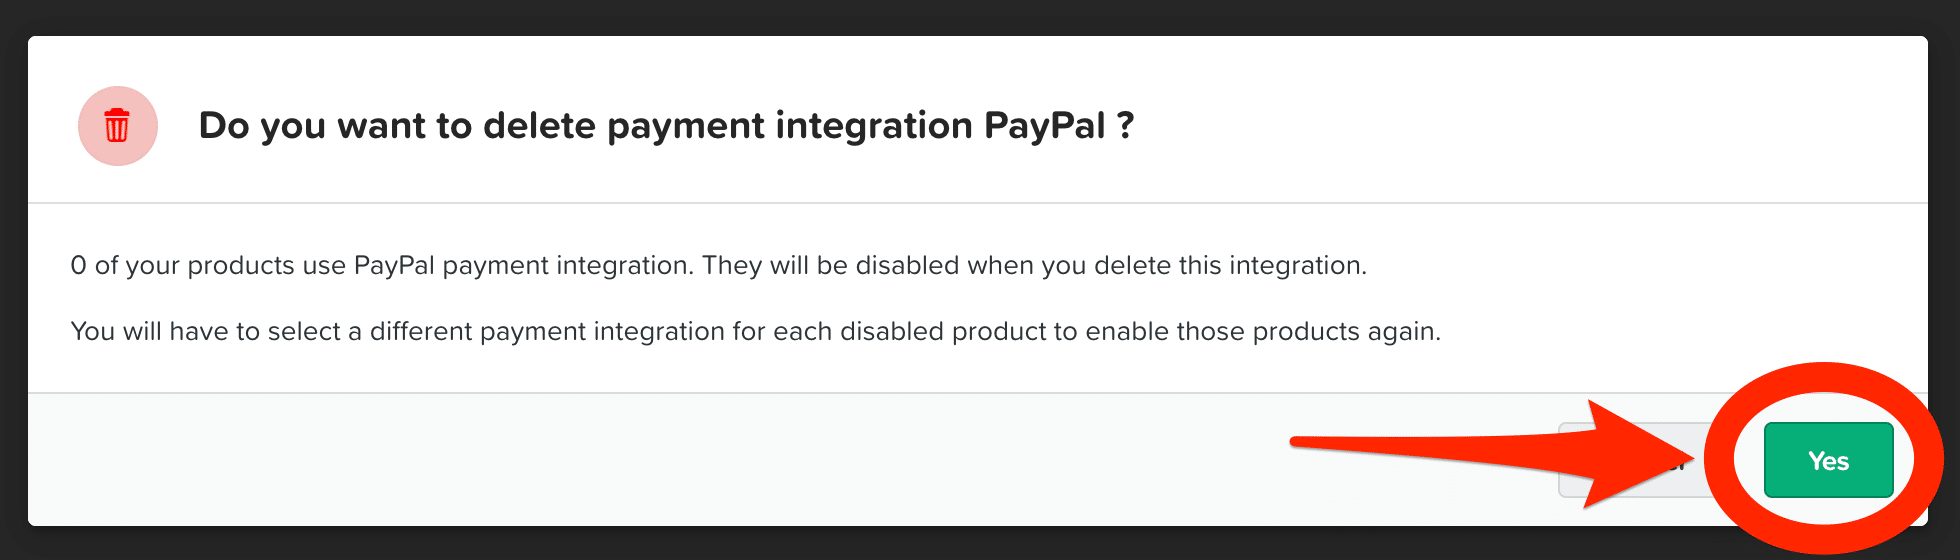 ClickFunnels asking to confirm deleting payment gateway